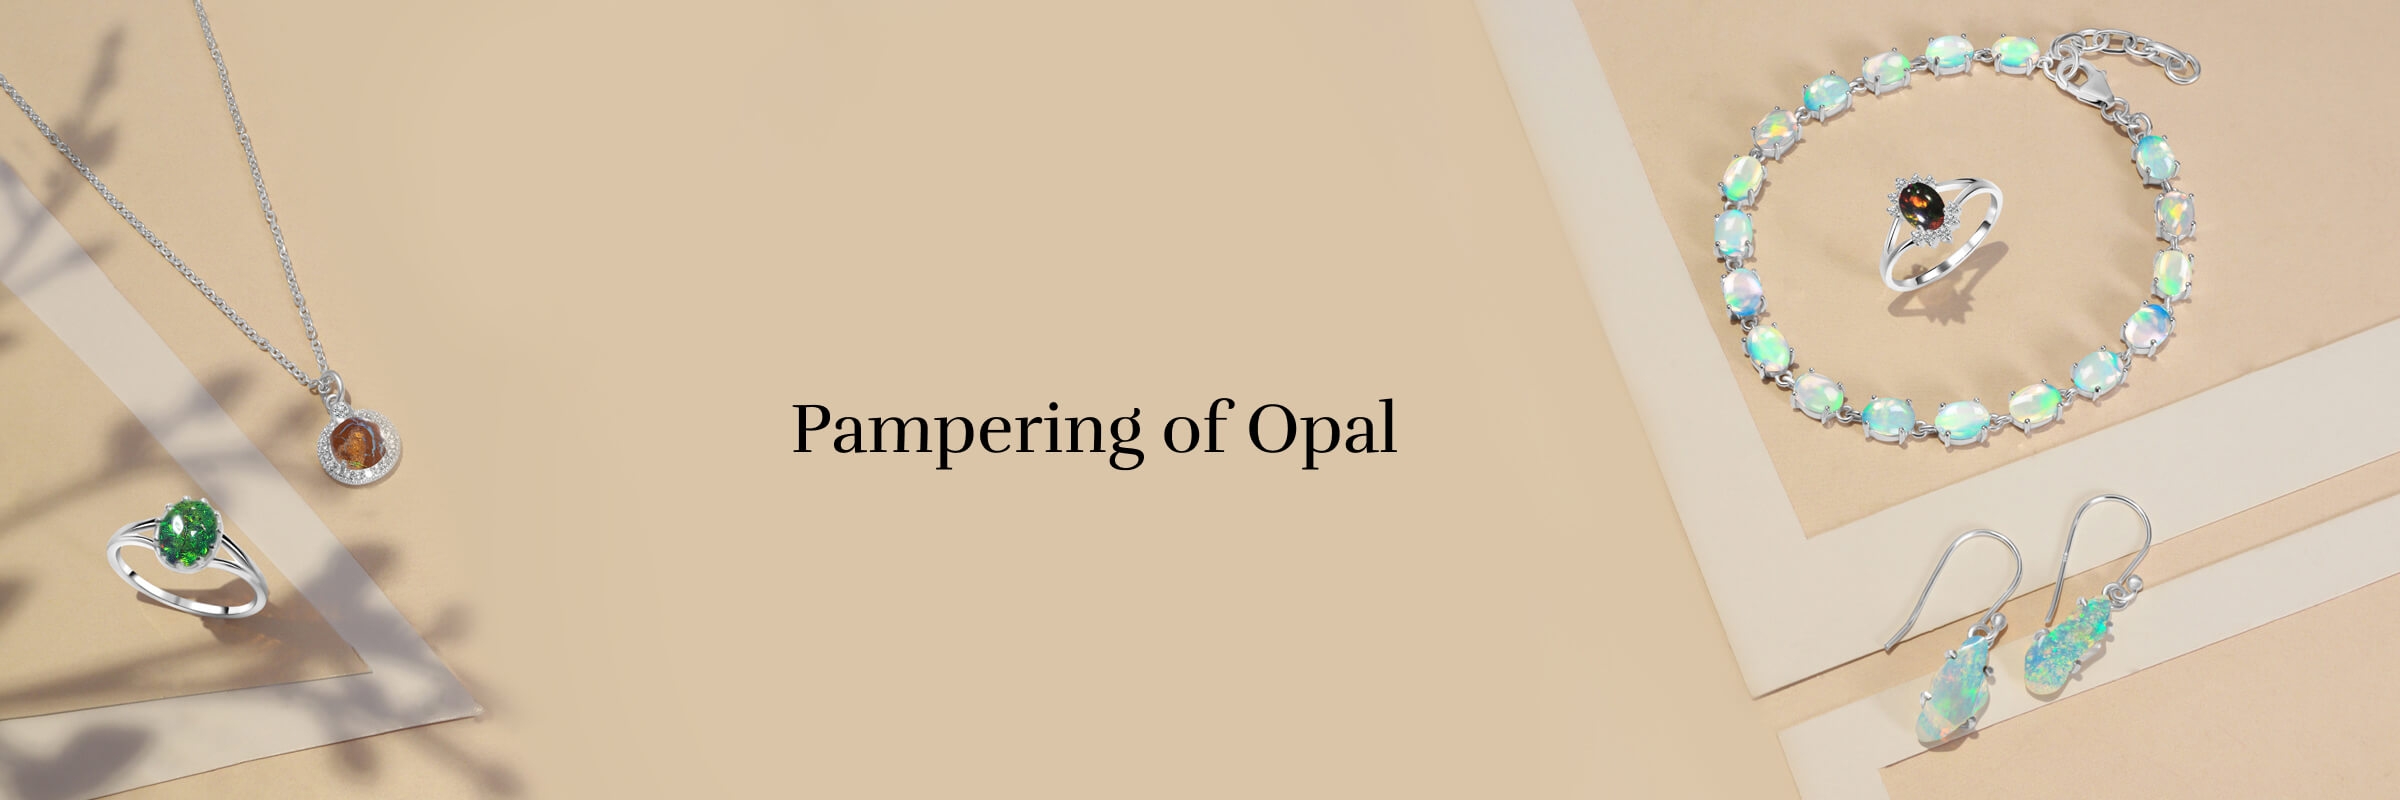 How to clean and take care of Opal